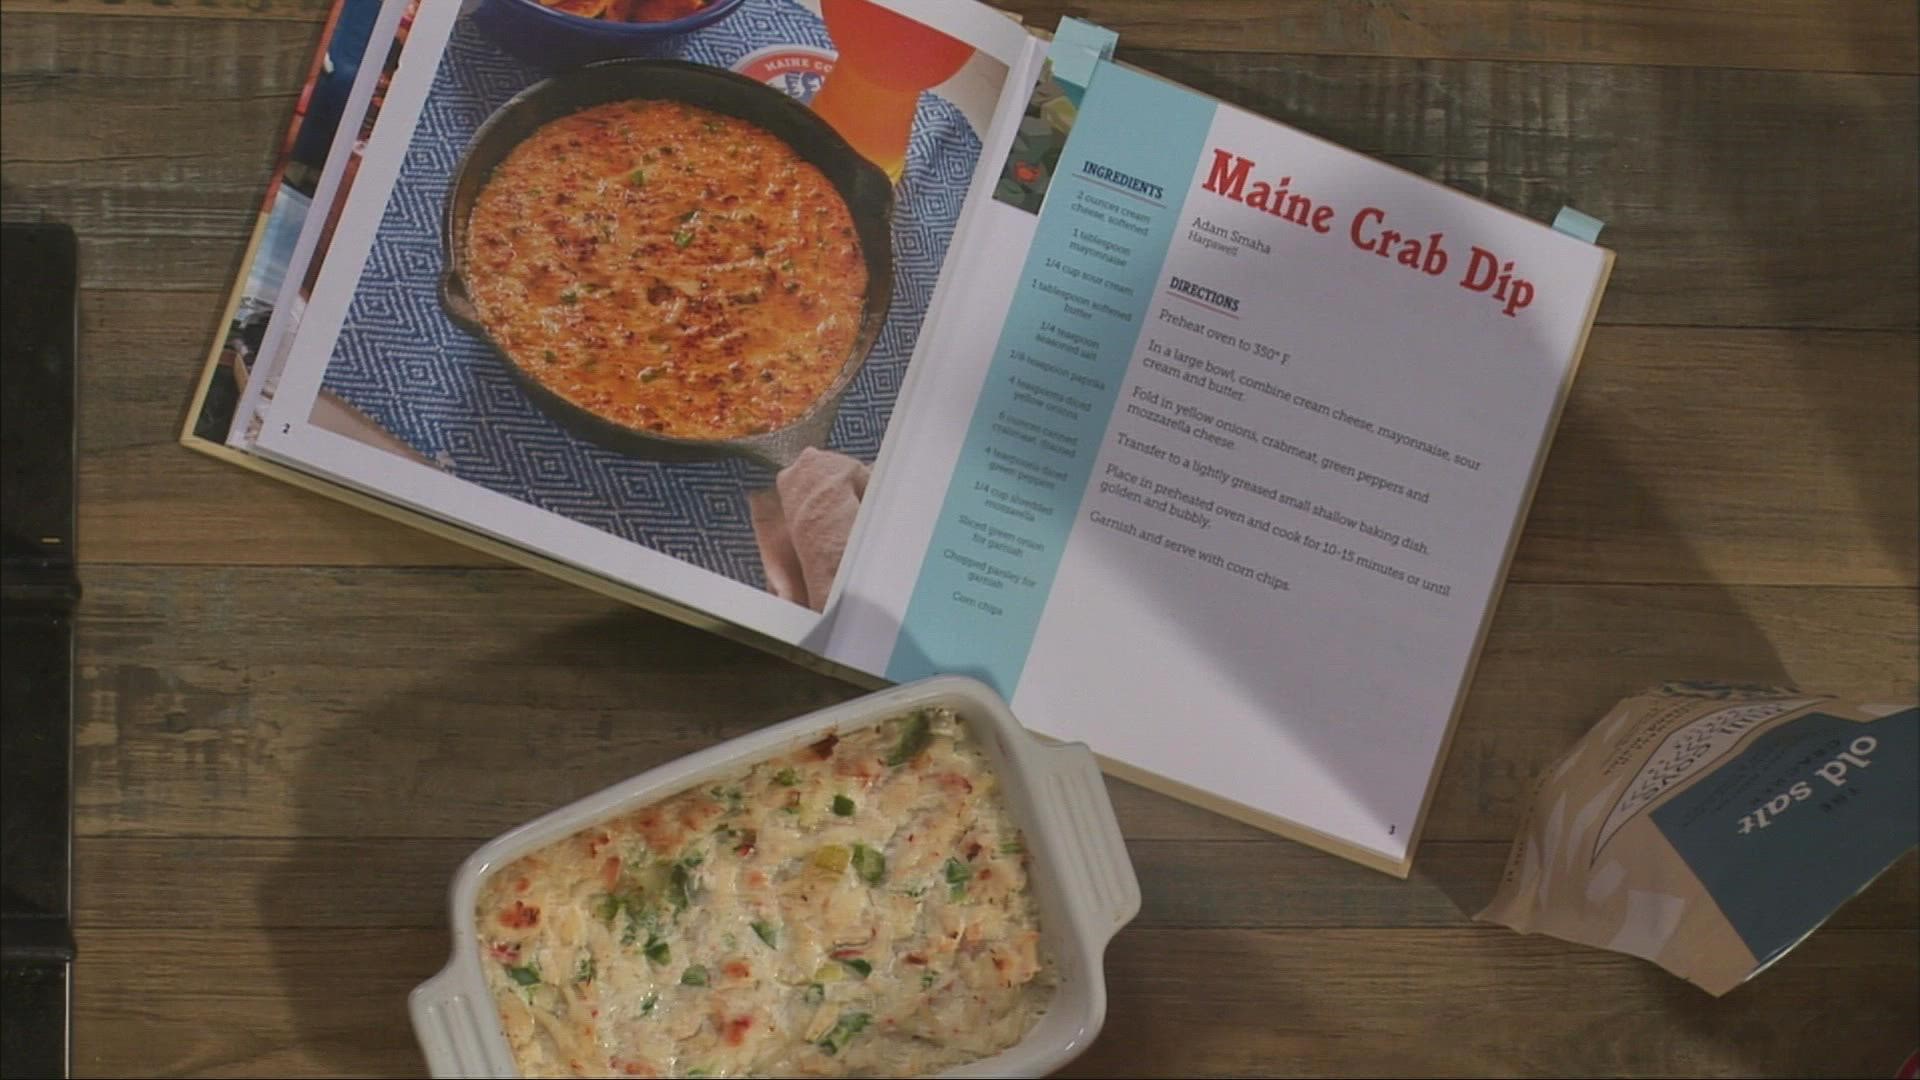 Monique Coombs is a contributor to the Catch Cookbook and shares her recipe for crab dip